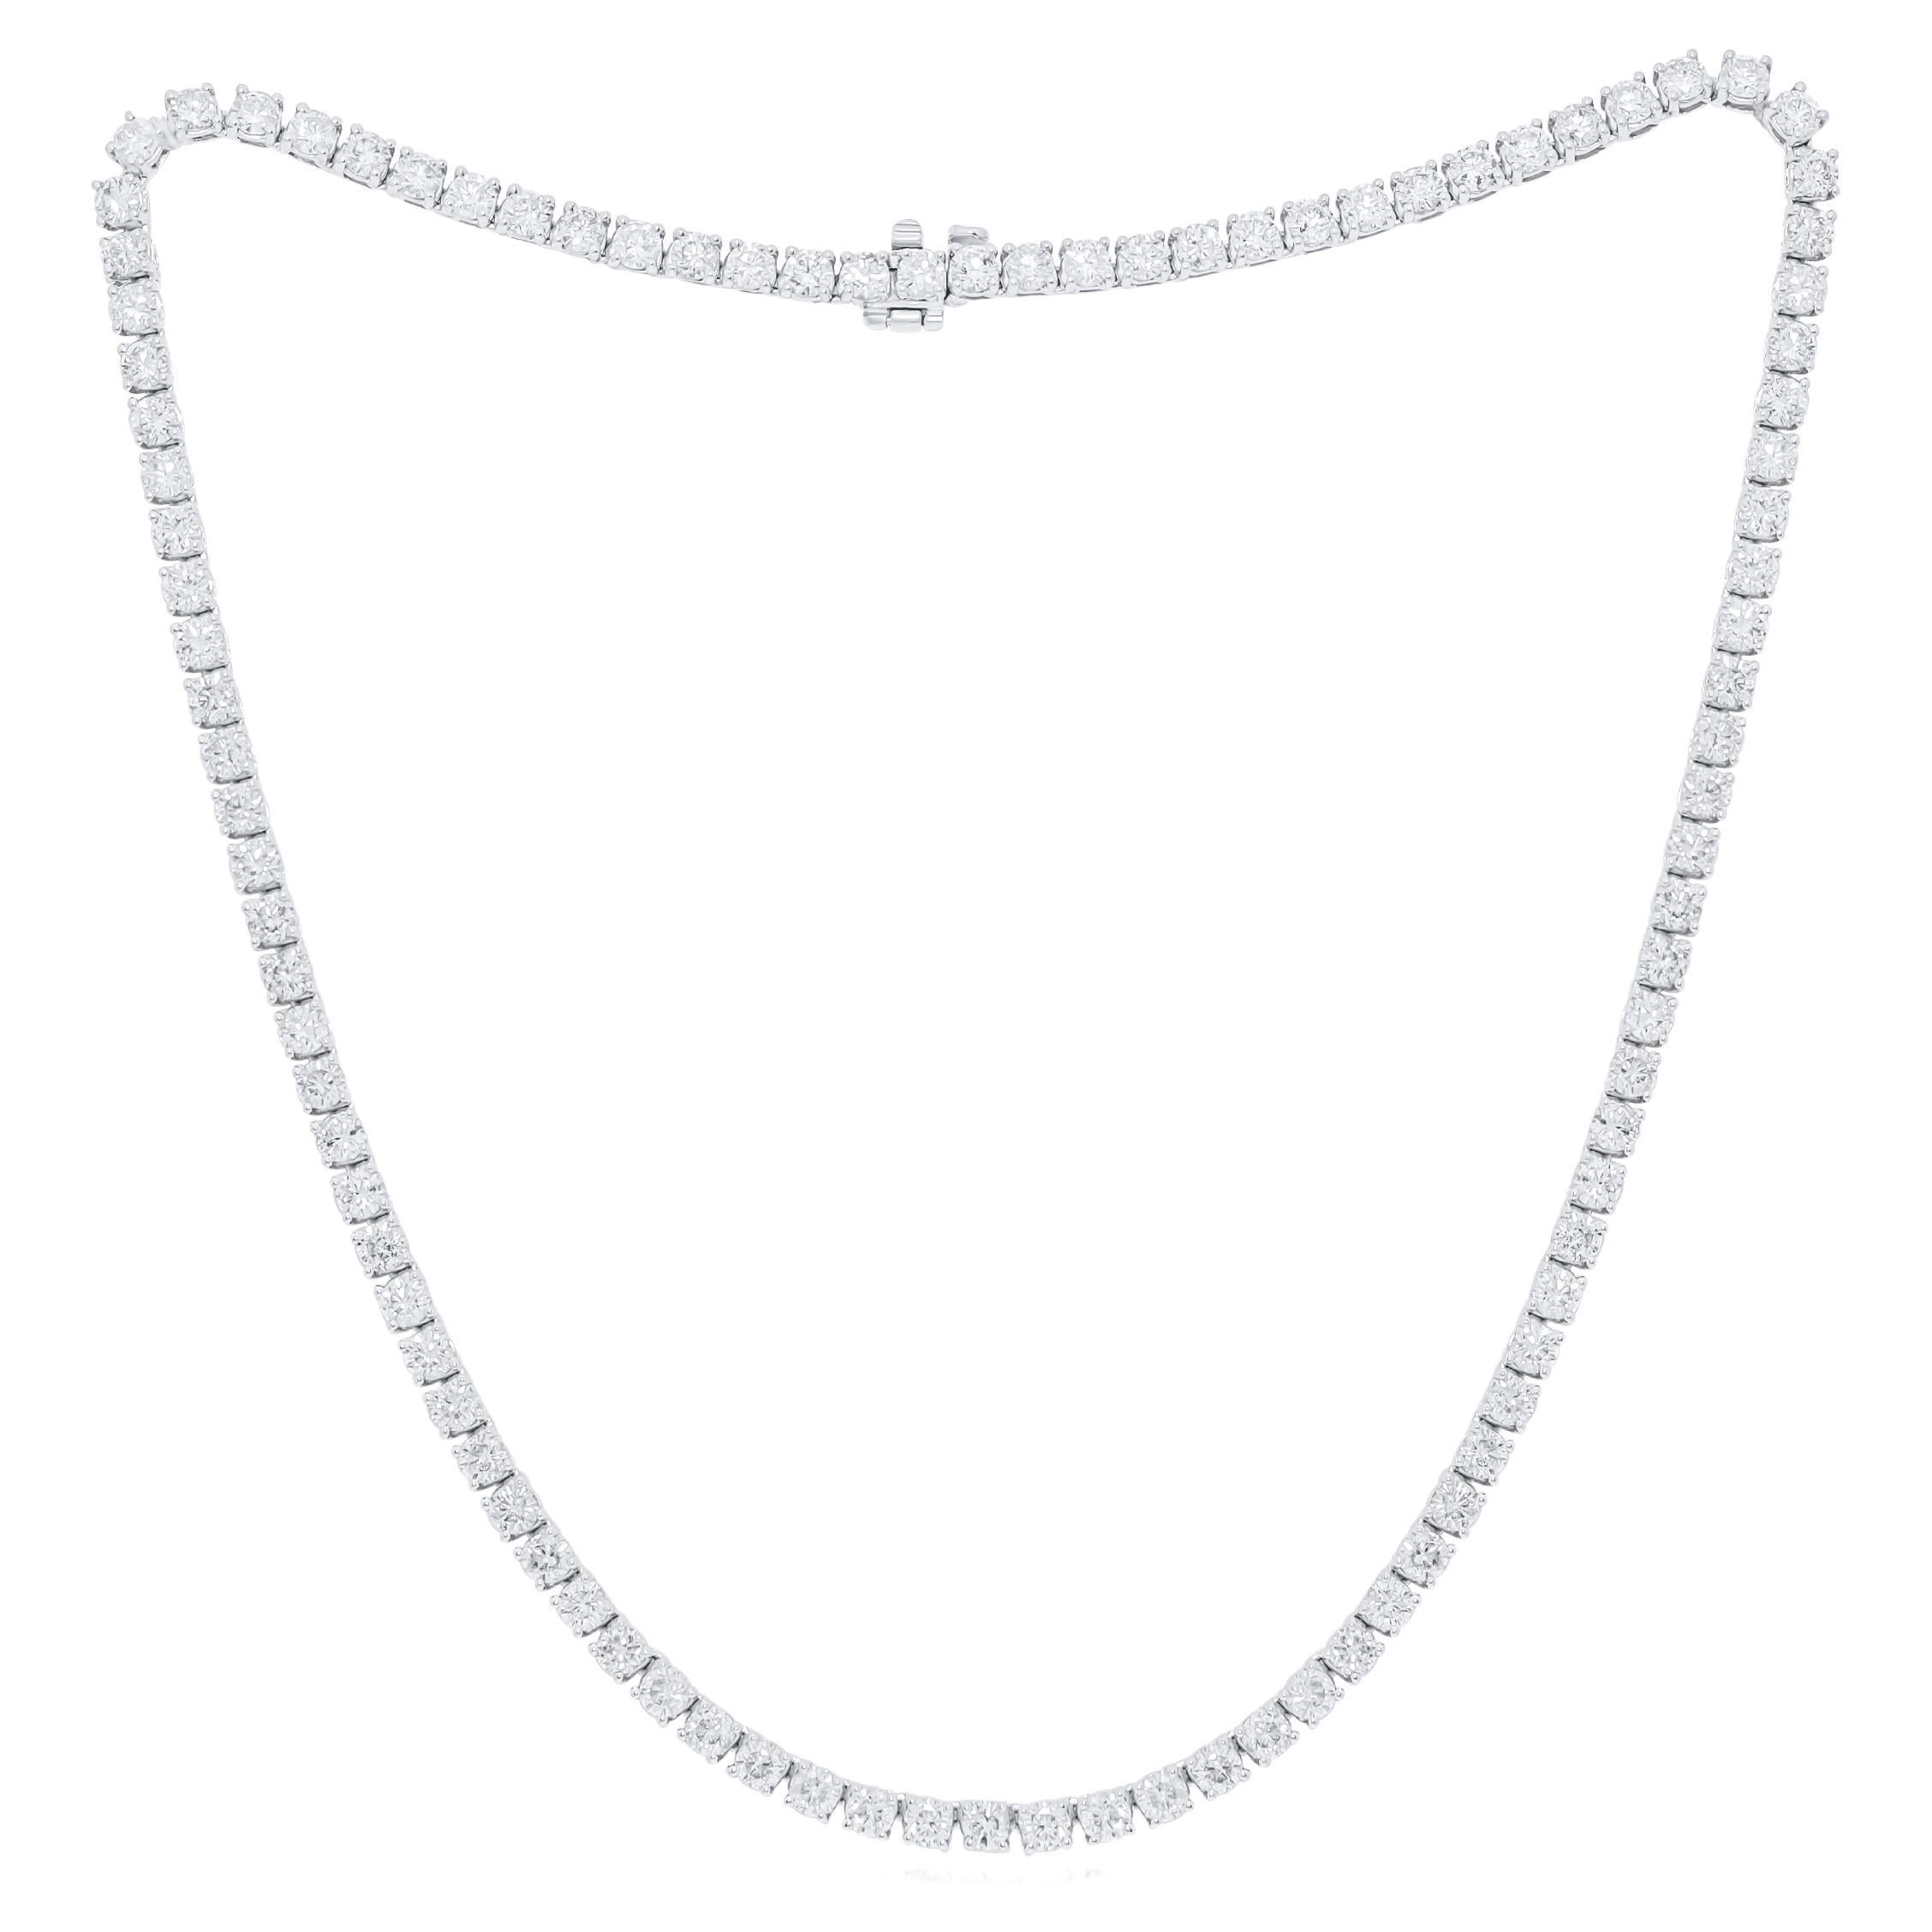 Diana M. Jewels Custom18 kt  White Gold 4 Prong Diamond Tennis Necklace 23.05ct